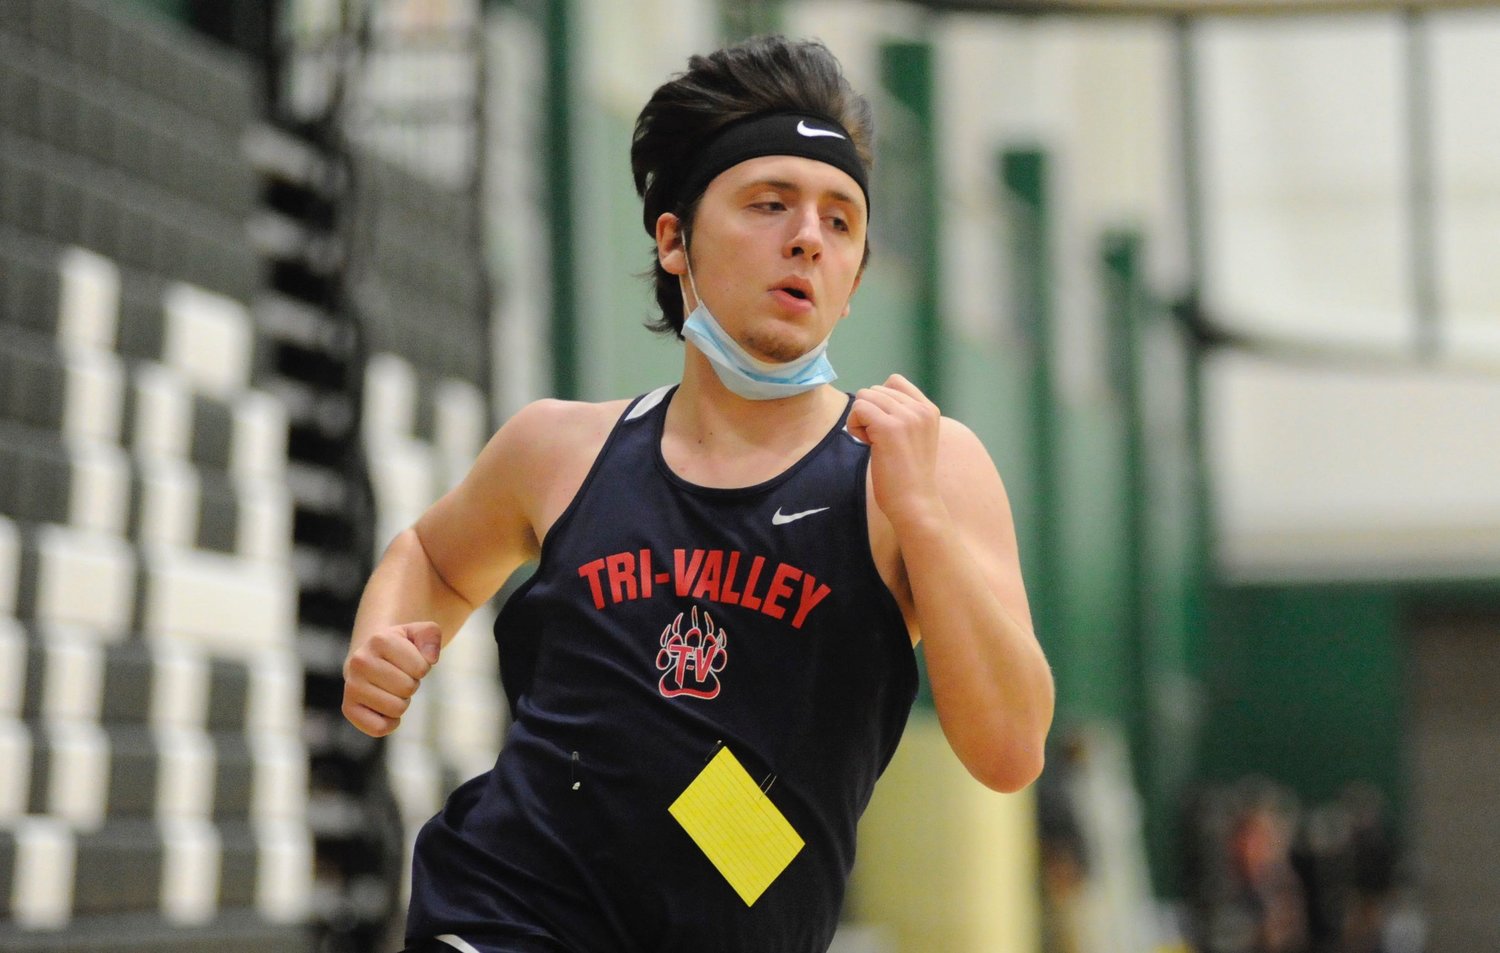 Tri-Valley’s Michael Squires was a member of the Bears’ team that finished in third place in the 4x100-meter relay.